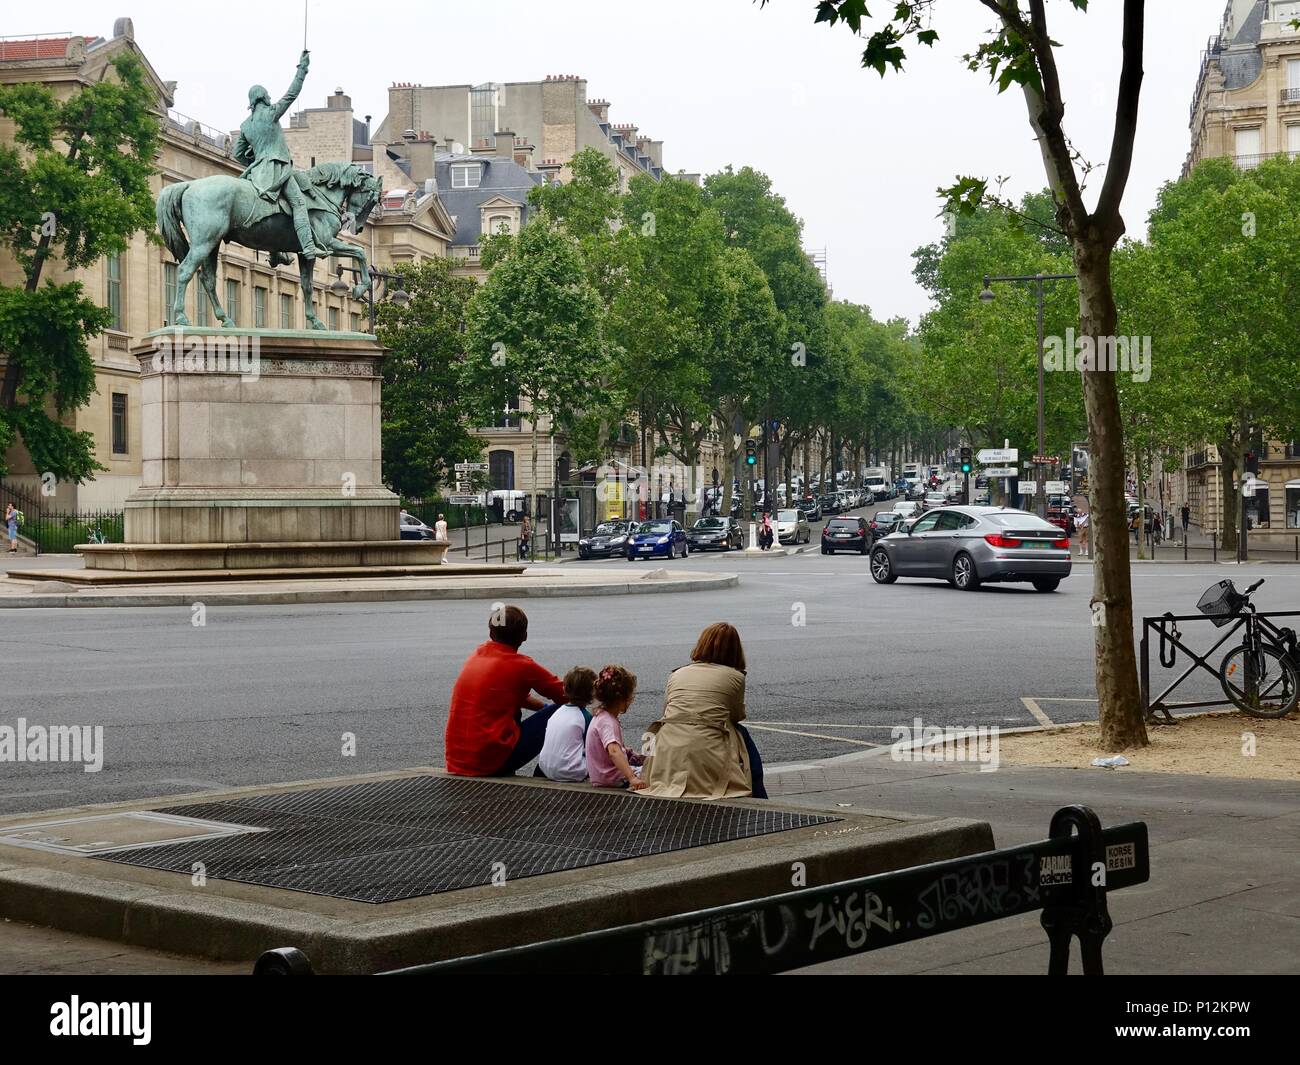 Tired family, parents, boy, girl, sitting on a curb across from a statue of George Washington, place d’Ilena, Paris, France Stock Photo